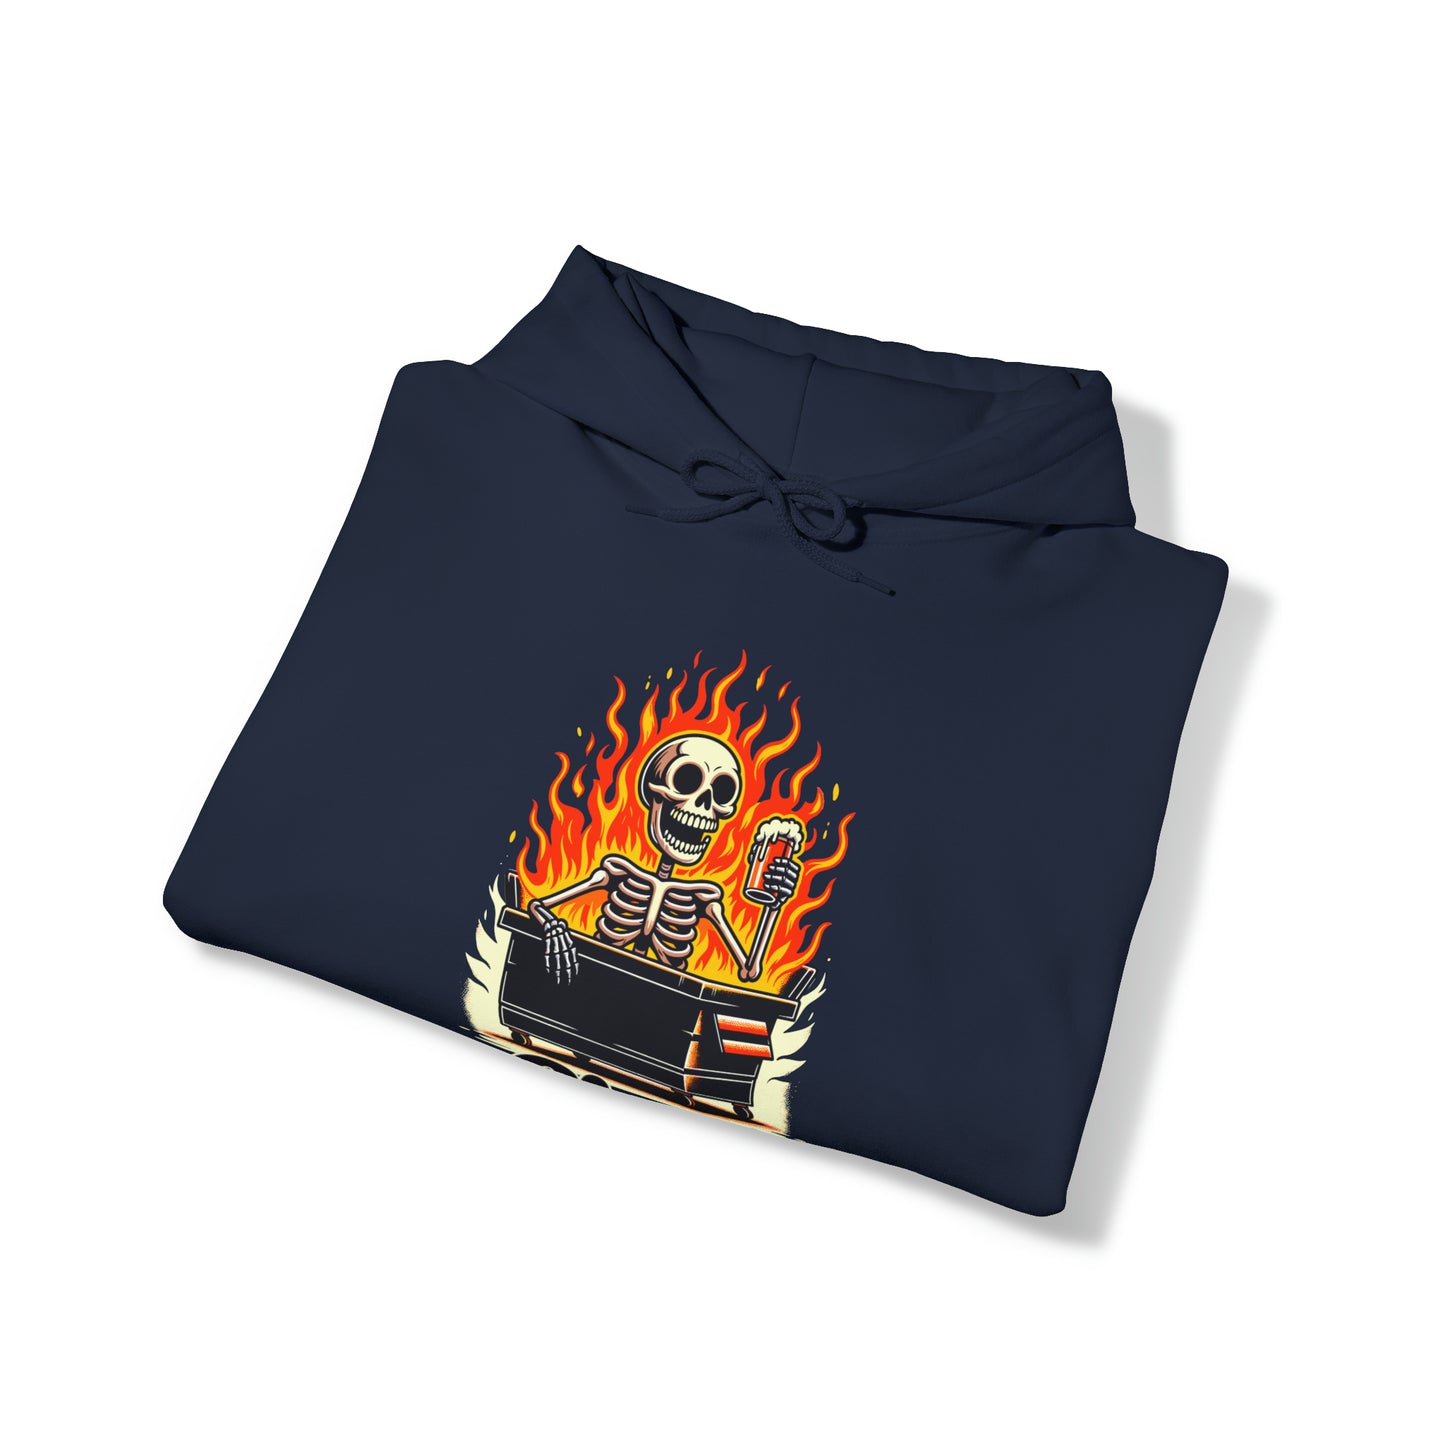 Cheers from the Dumpster Fire Unisex Heavy Blend™ Hooded Sweatshirt